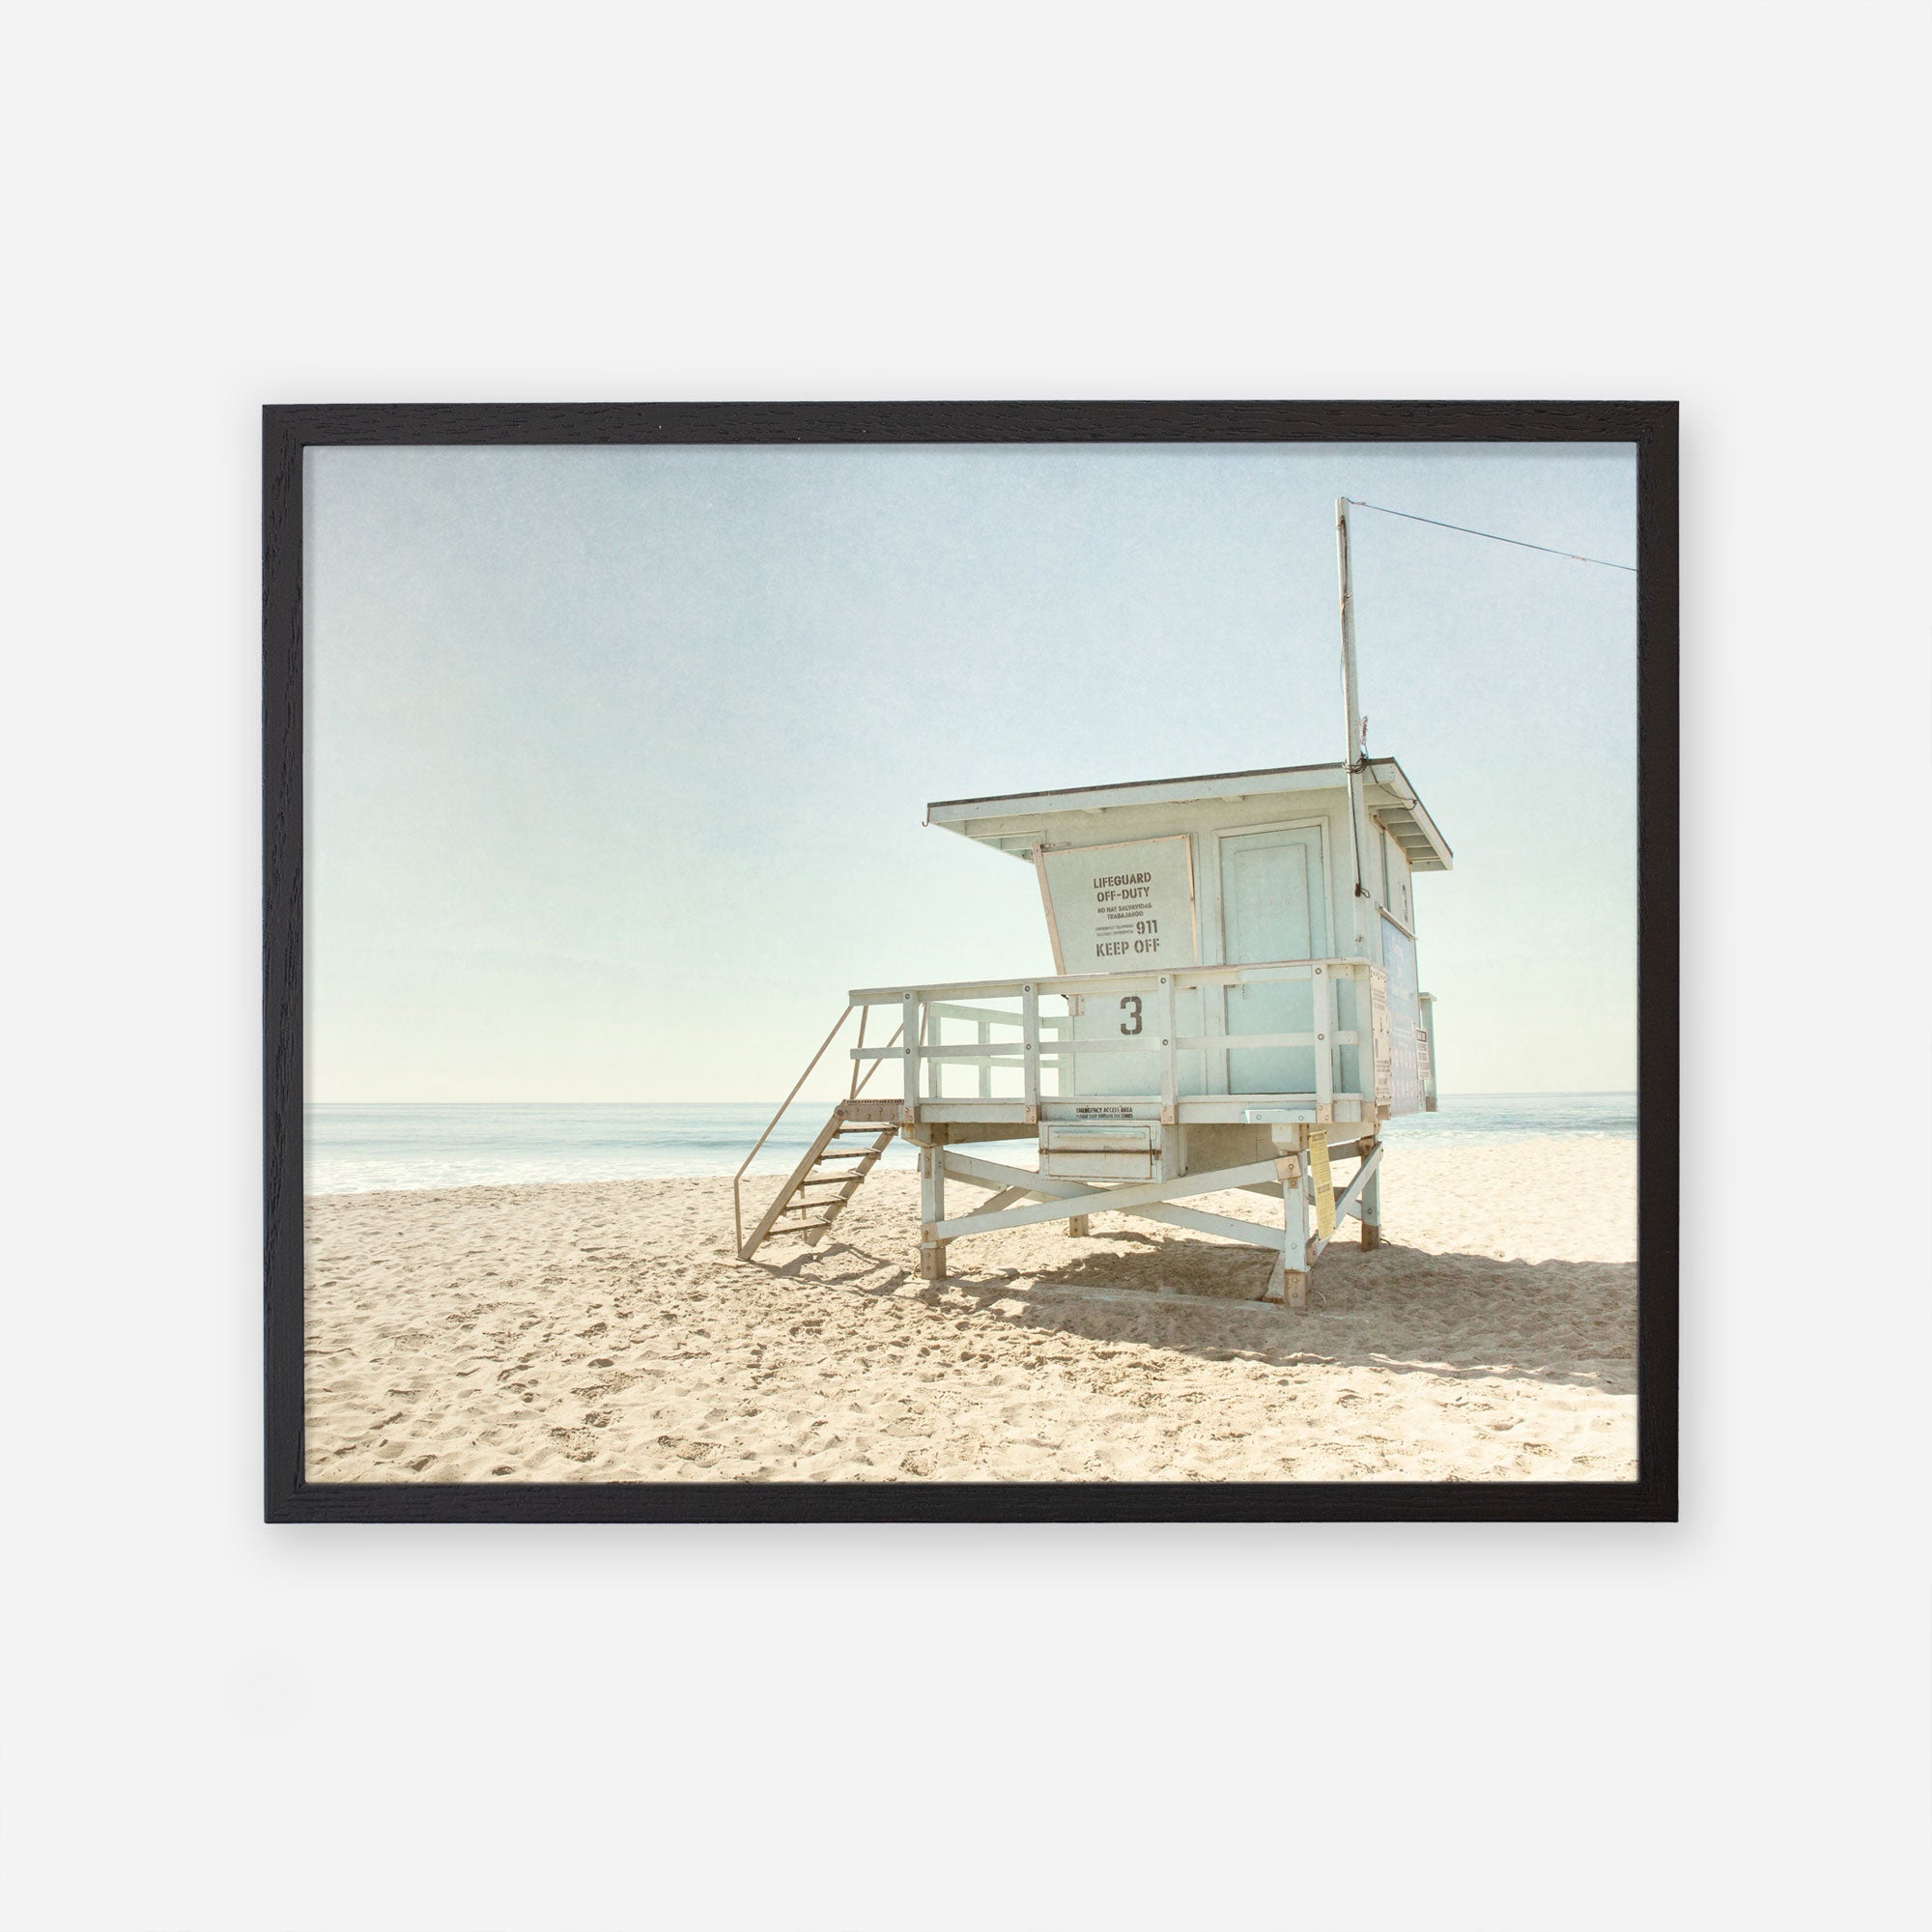 A framed photograph of the California Summer Beach Art, &#39;Malibu Lifeguard Tower&#39; by Offley Green, situated on a sandy beach in Malibu under a clear sky, with its facade numbered &quot;3&quot;.